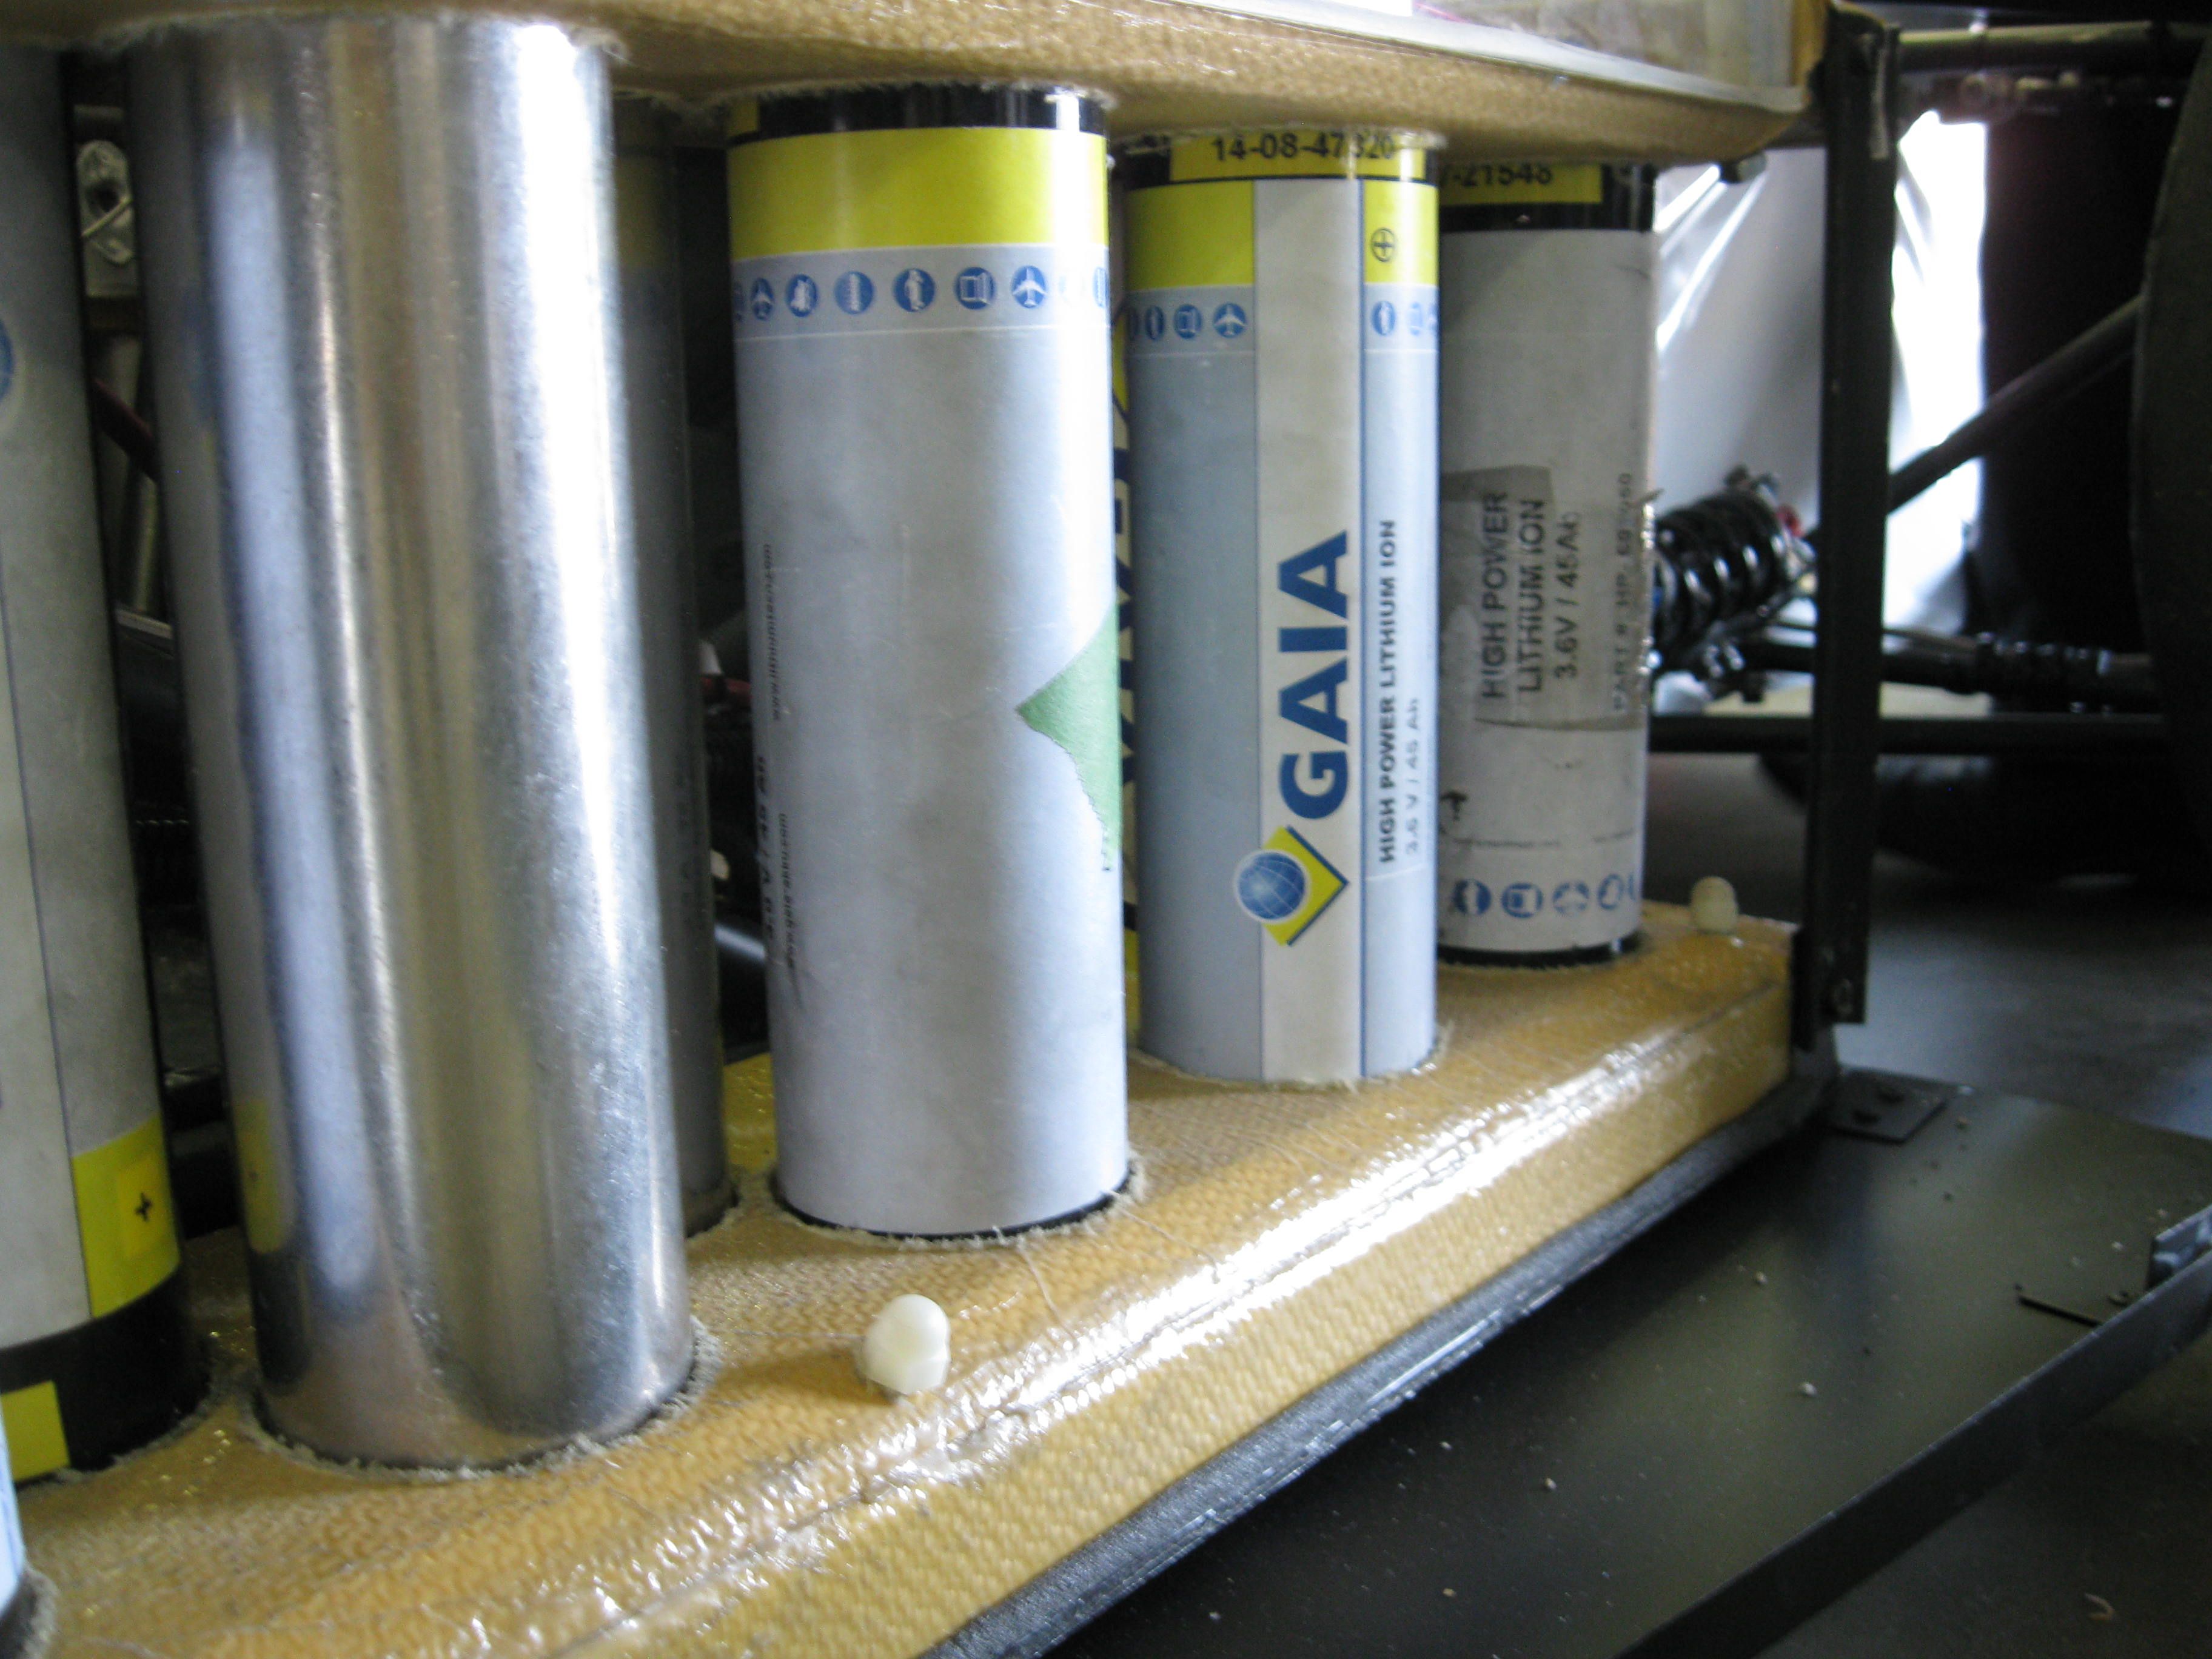 Manitoba battery using 10 Gaia LiCo large cylindrical cells